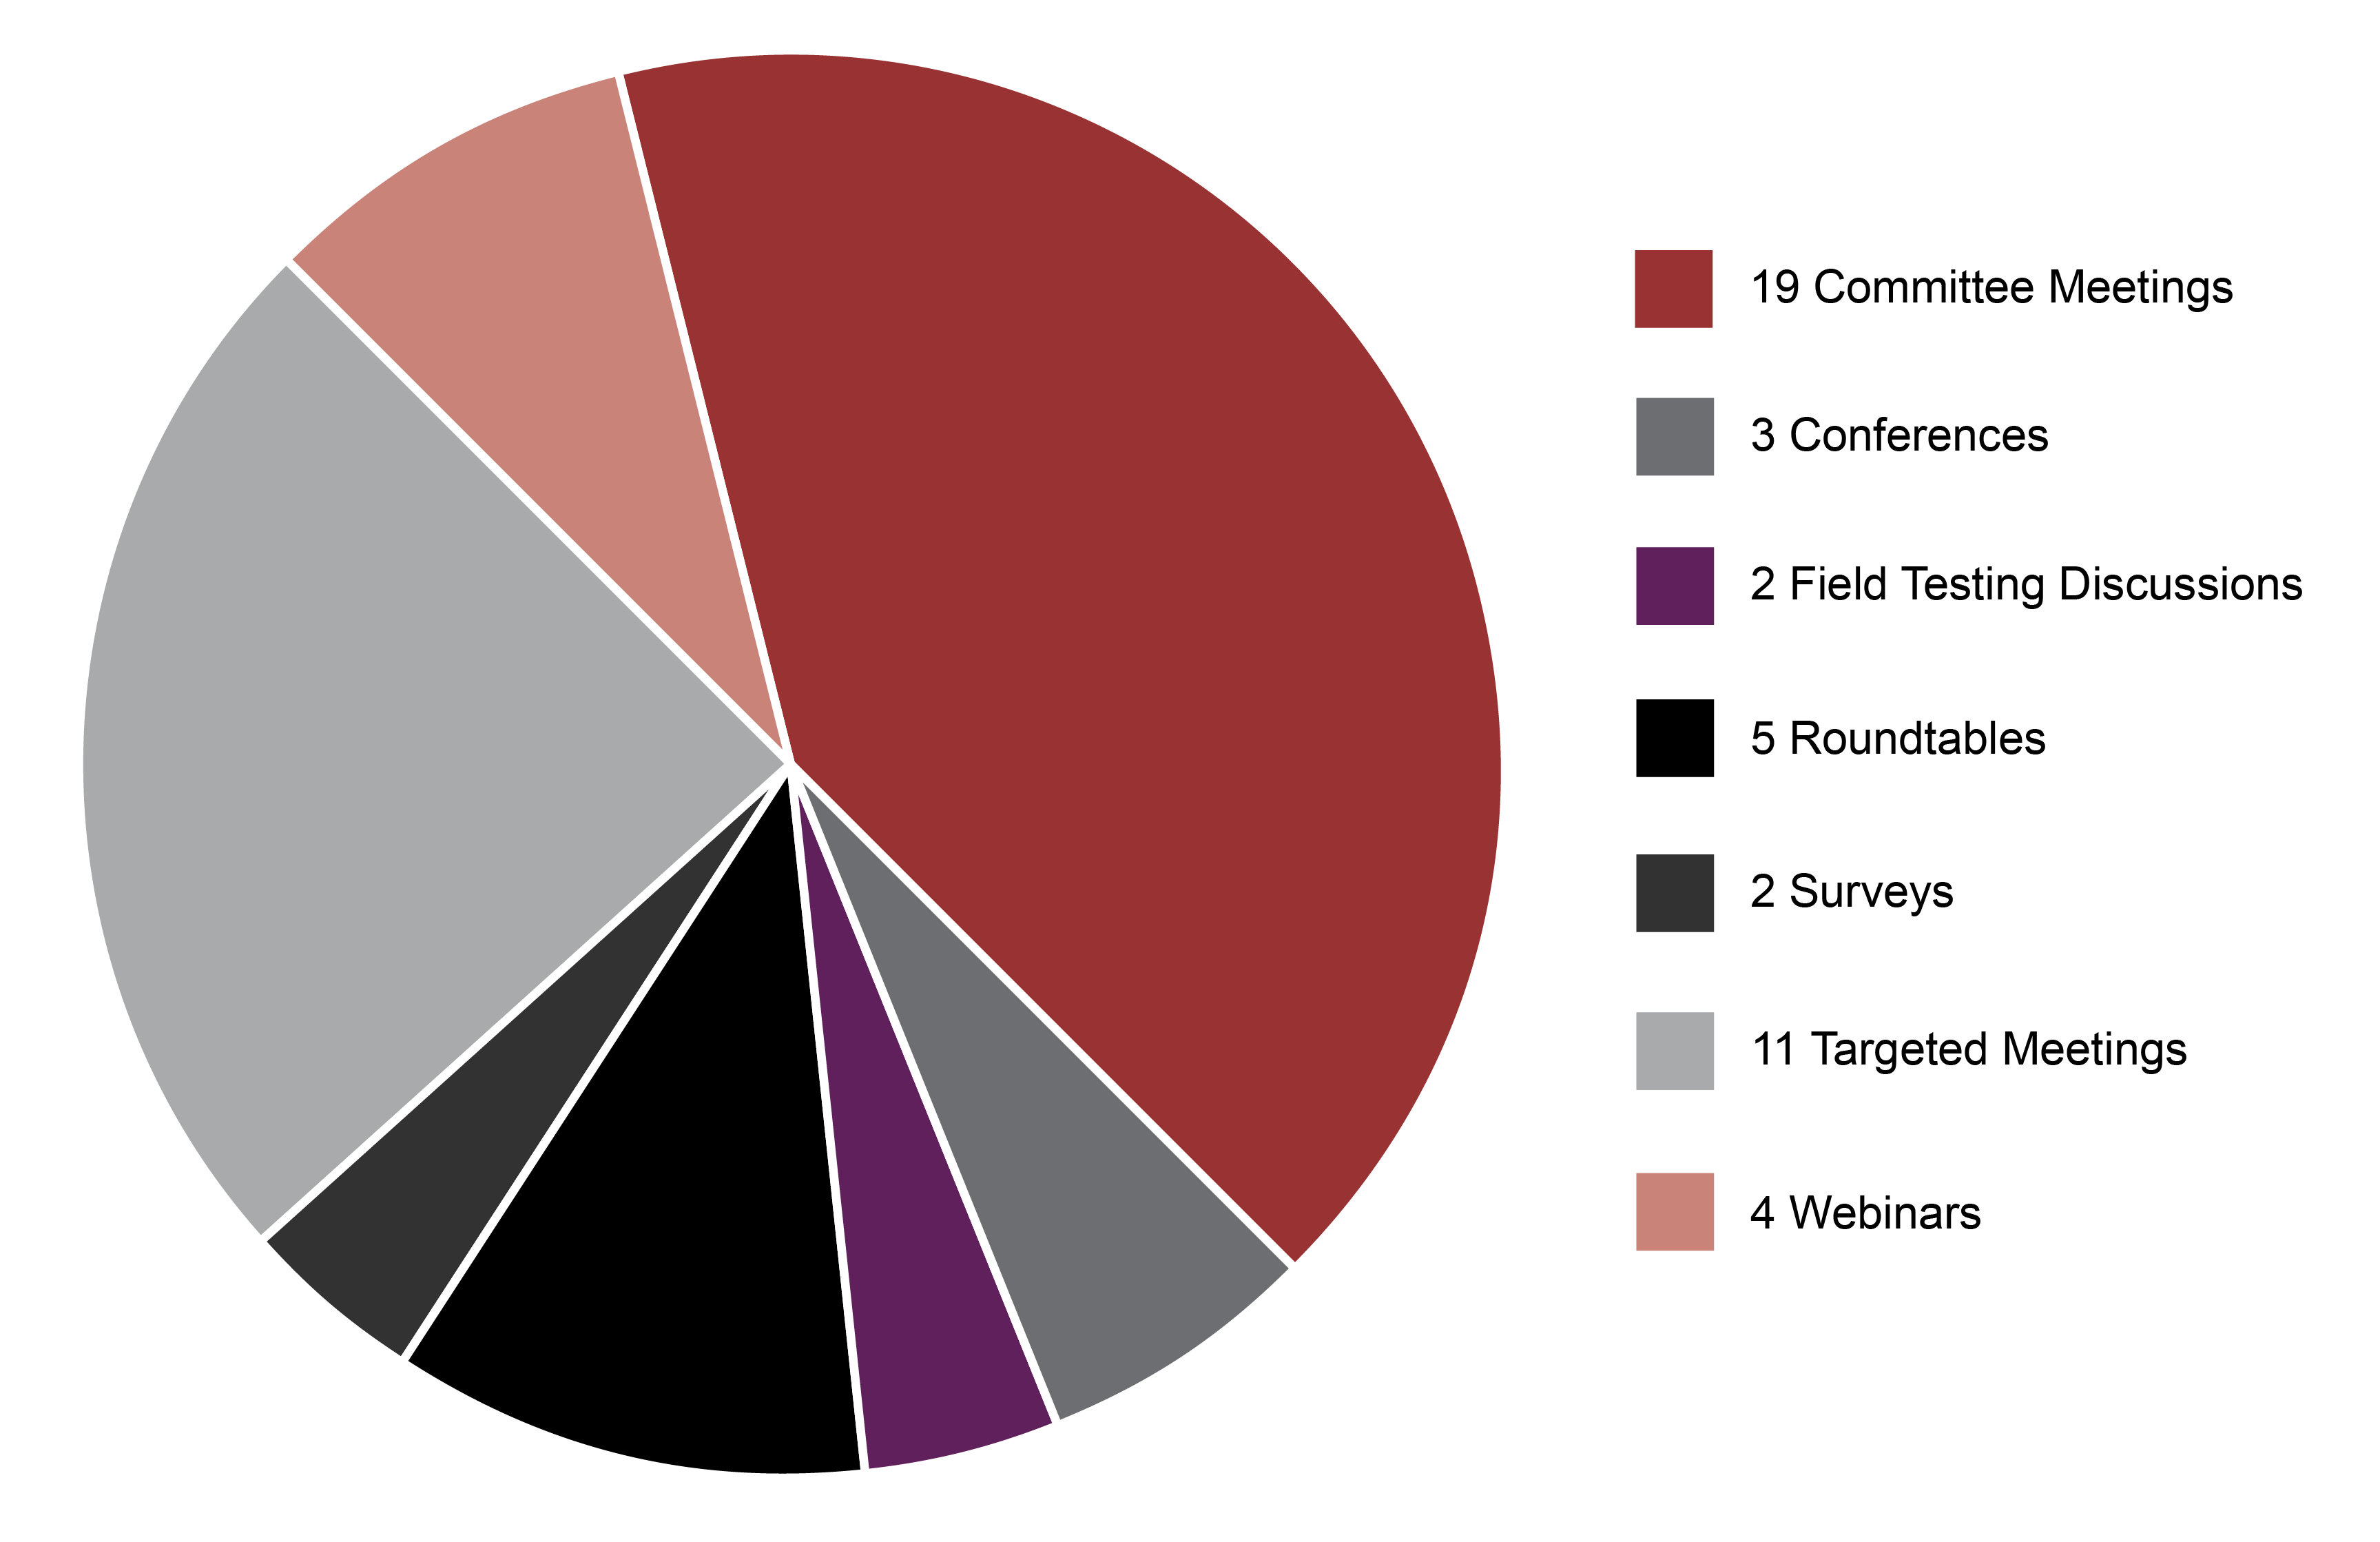 A pie chart depicting the percentage split of ways we gathered your feedback to our Exposure Draft.